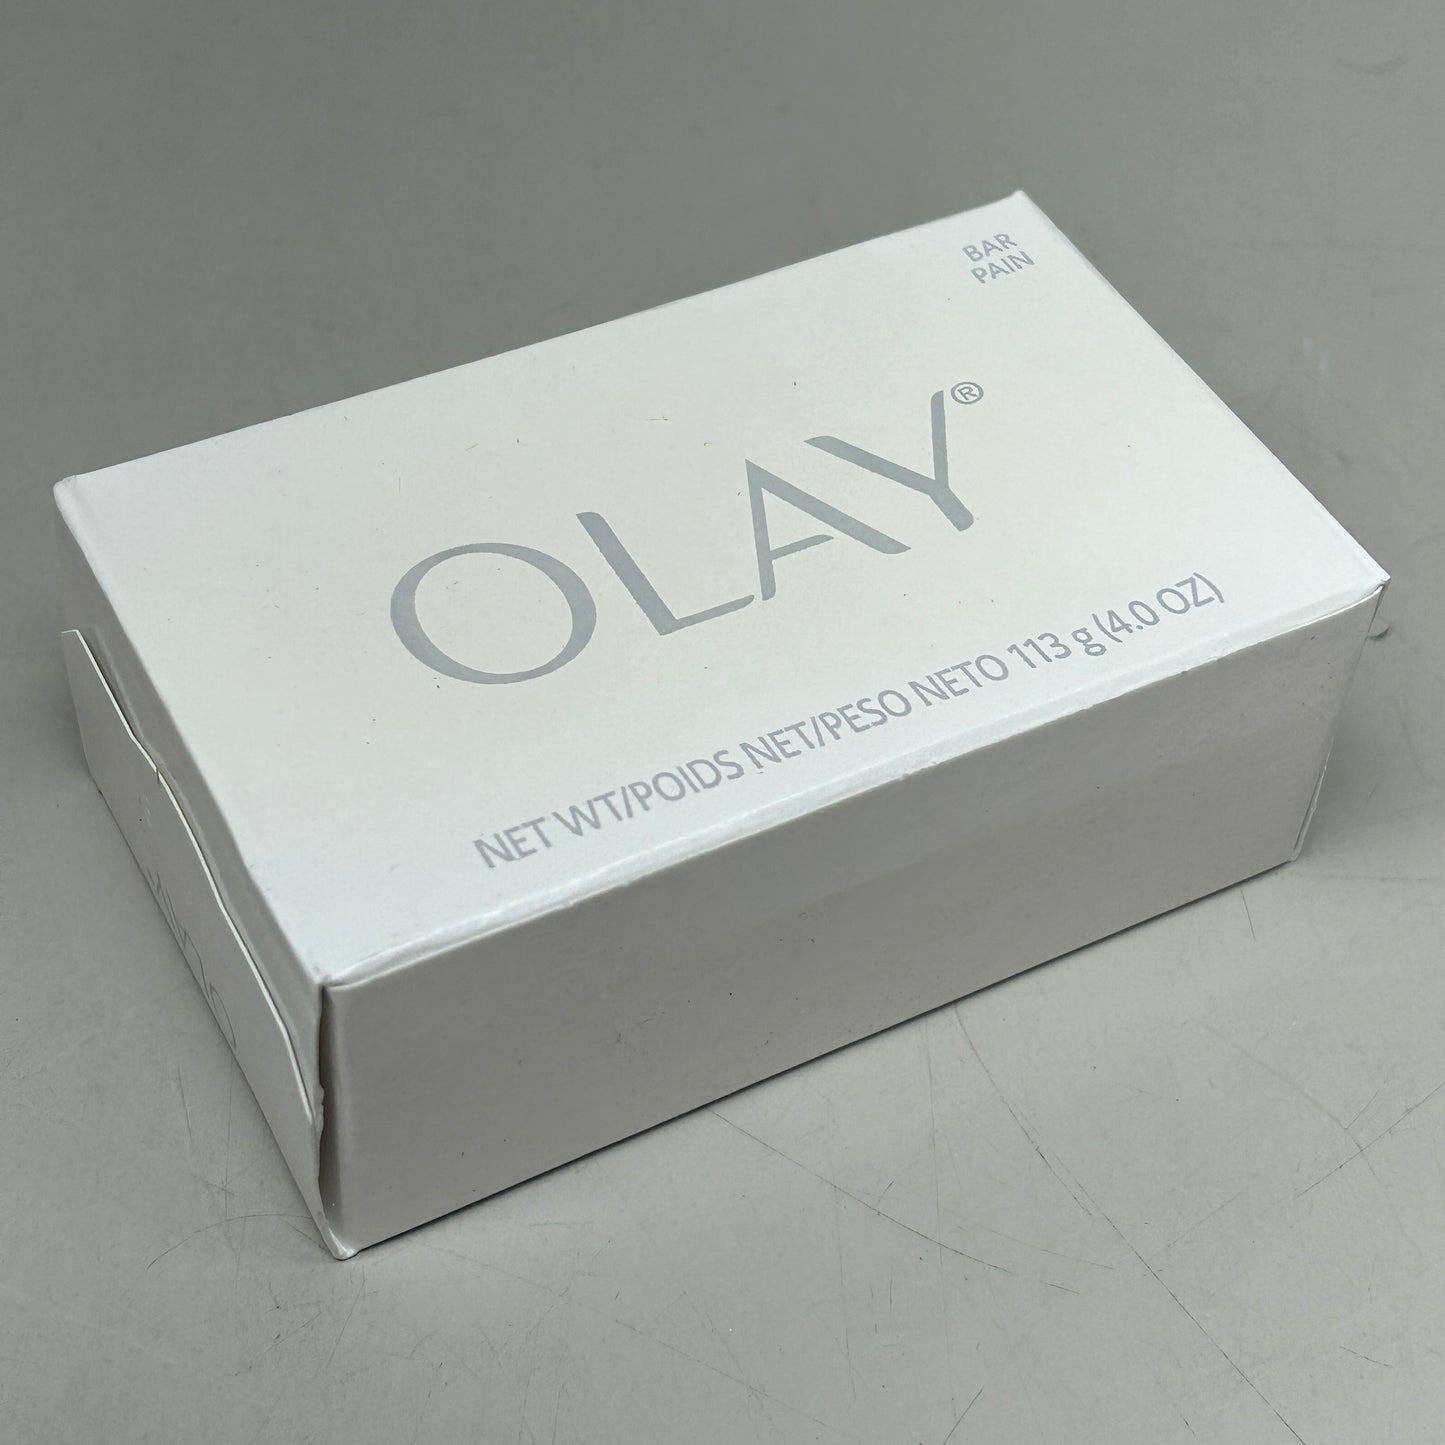 OLAY (16 PACK) Ultra Fresh Cleansing Bars 4oz ea Birch Water & Lavender (AS-IS)